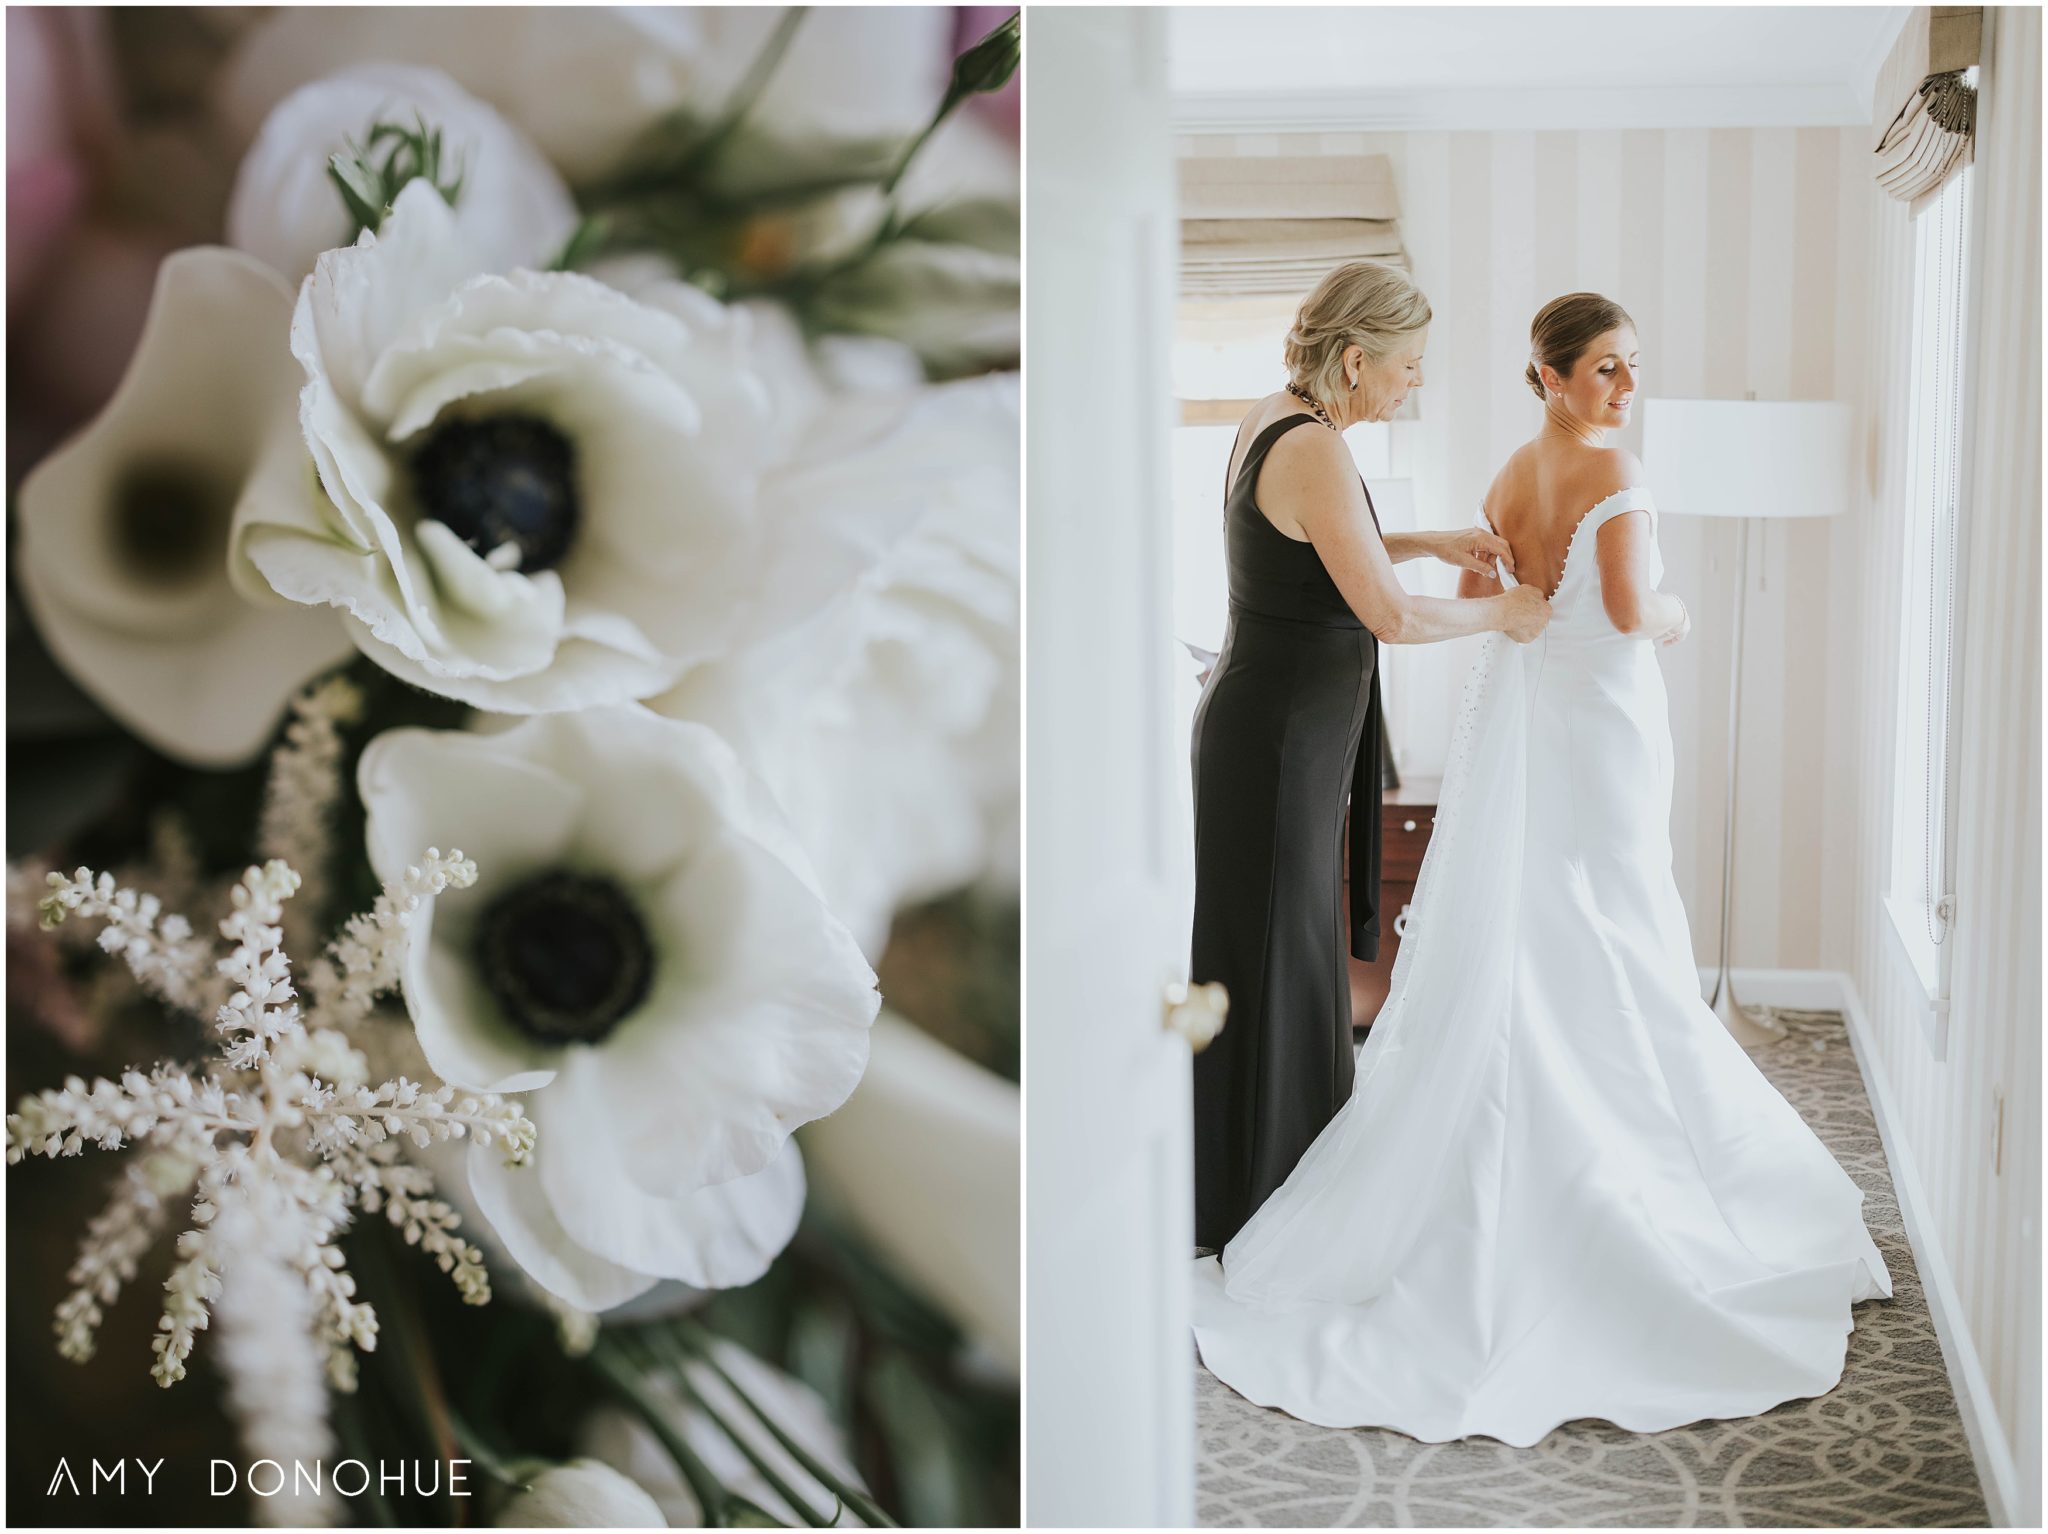 Getting Ready Lily of the Valley Florist | Hildene Weddings | Manchester, Vermont Wedding Photographer